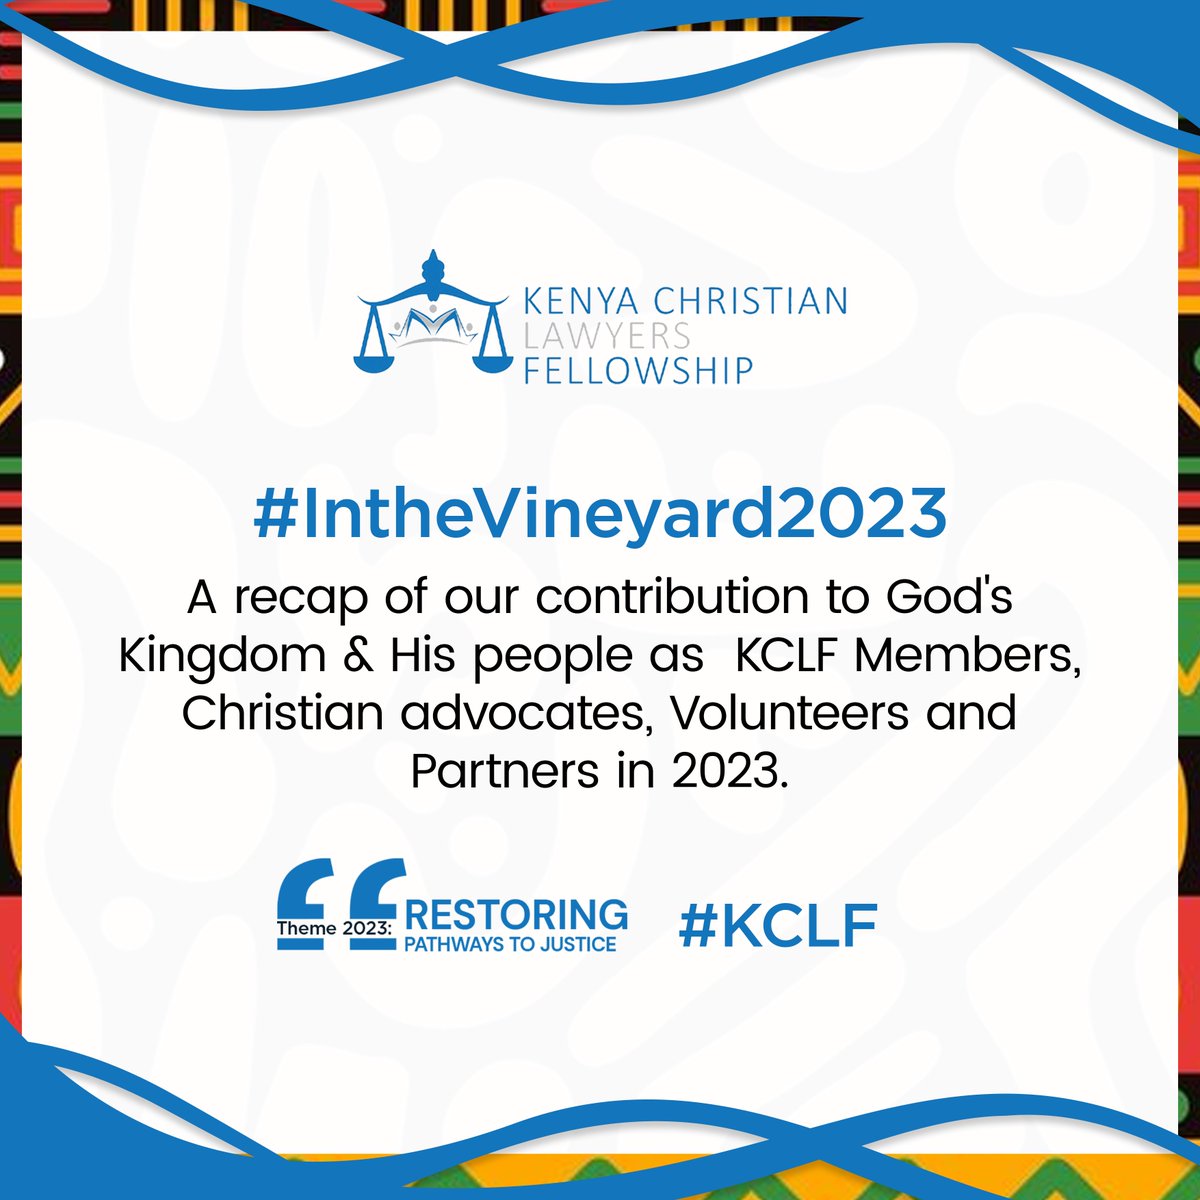 As we approach the end of 2023, KCLF celebrates significant achievements in line with our 2023 theme: 'Restoring pathways to Justice,Refining words.' 

We're excited to share our achievements in 2023, as we focused on improving #accesstojustice for God's people #inthevineyard.